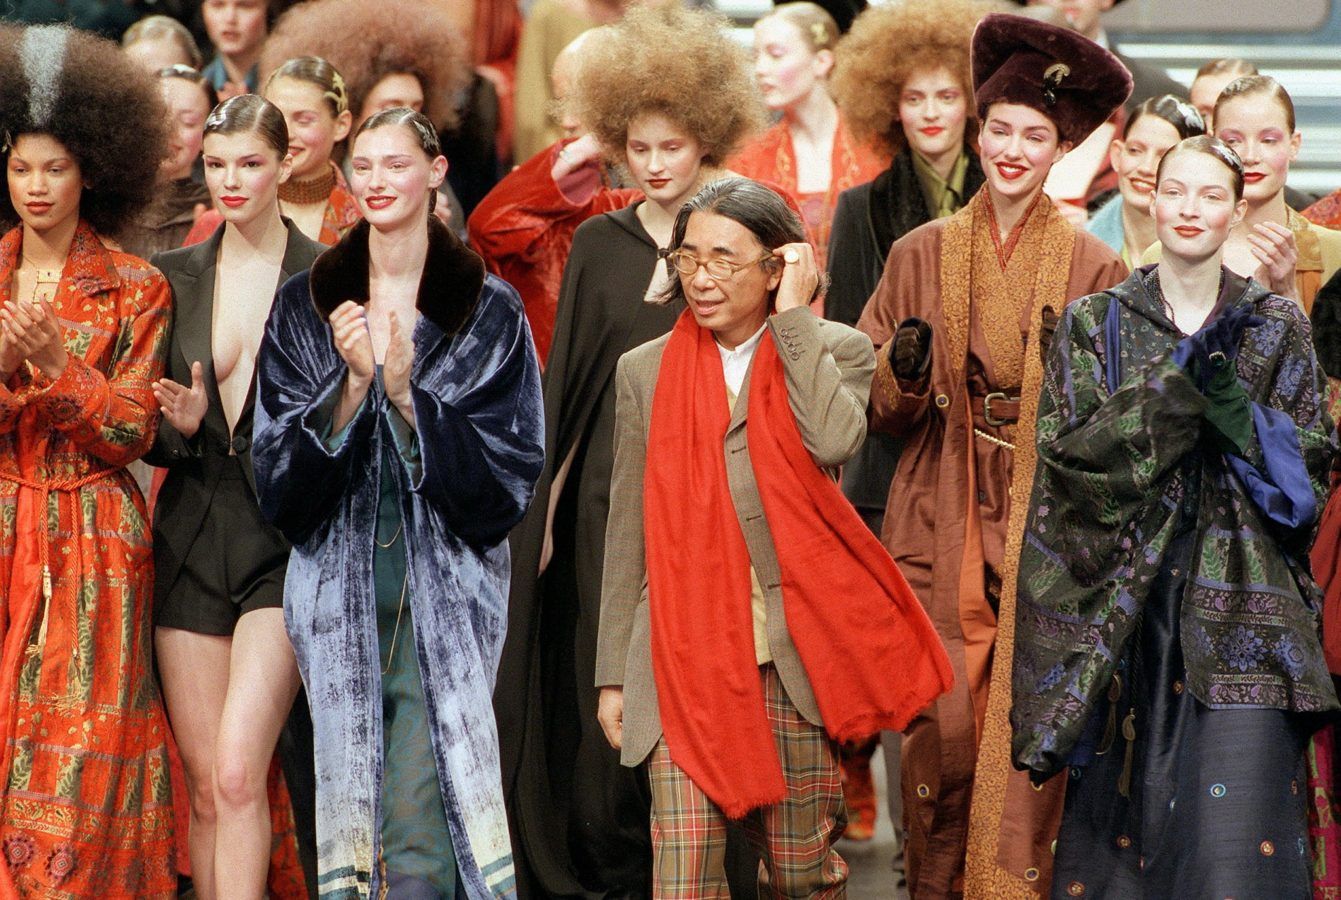 RIP Kenzo Takada: Looking back on the legacy of the founder of Kenzo